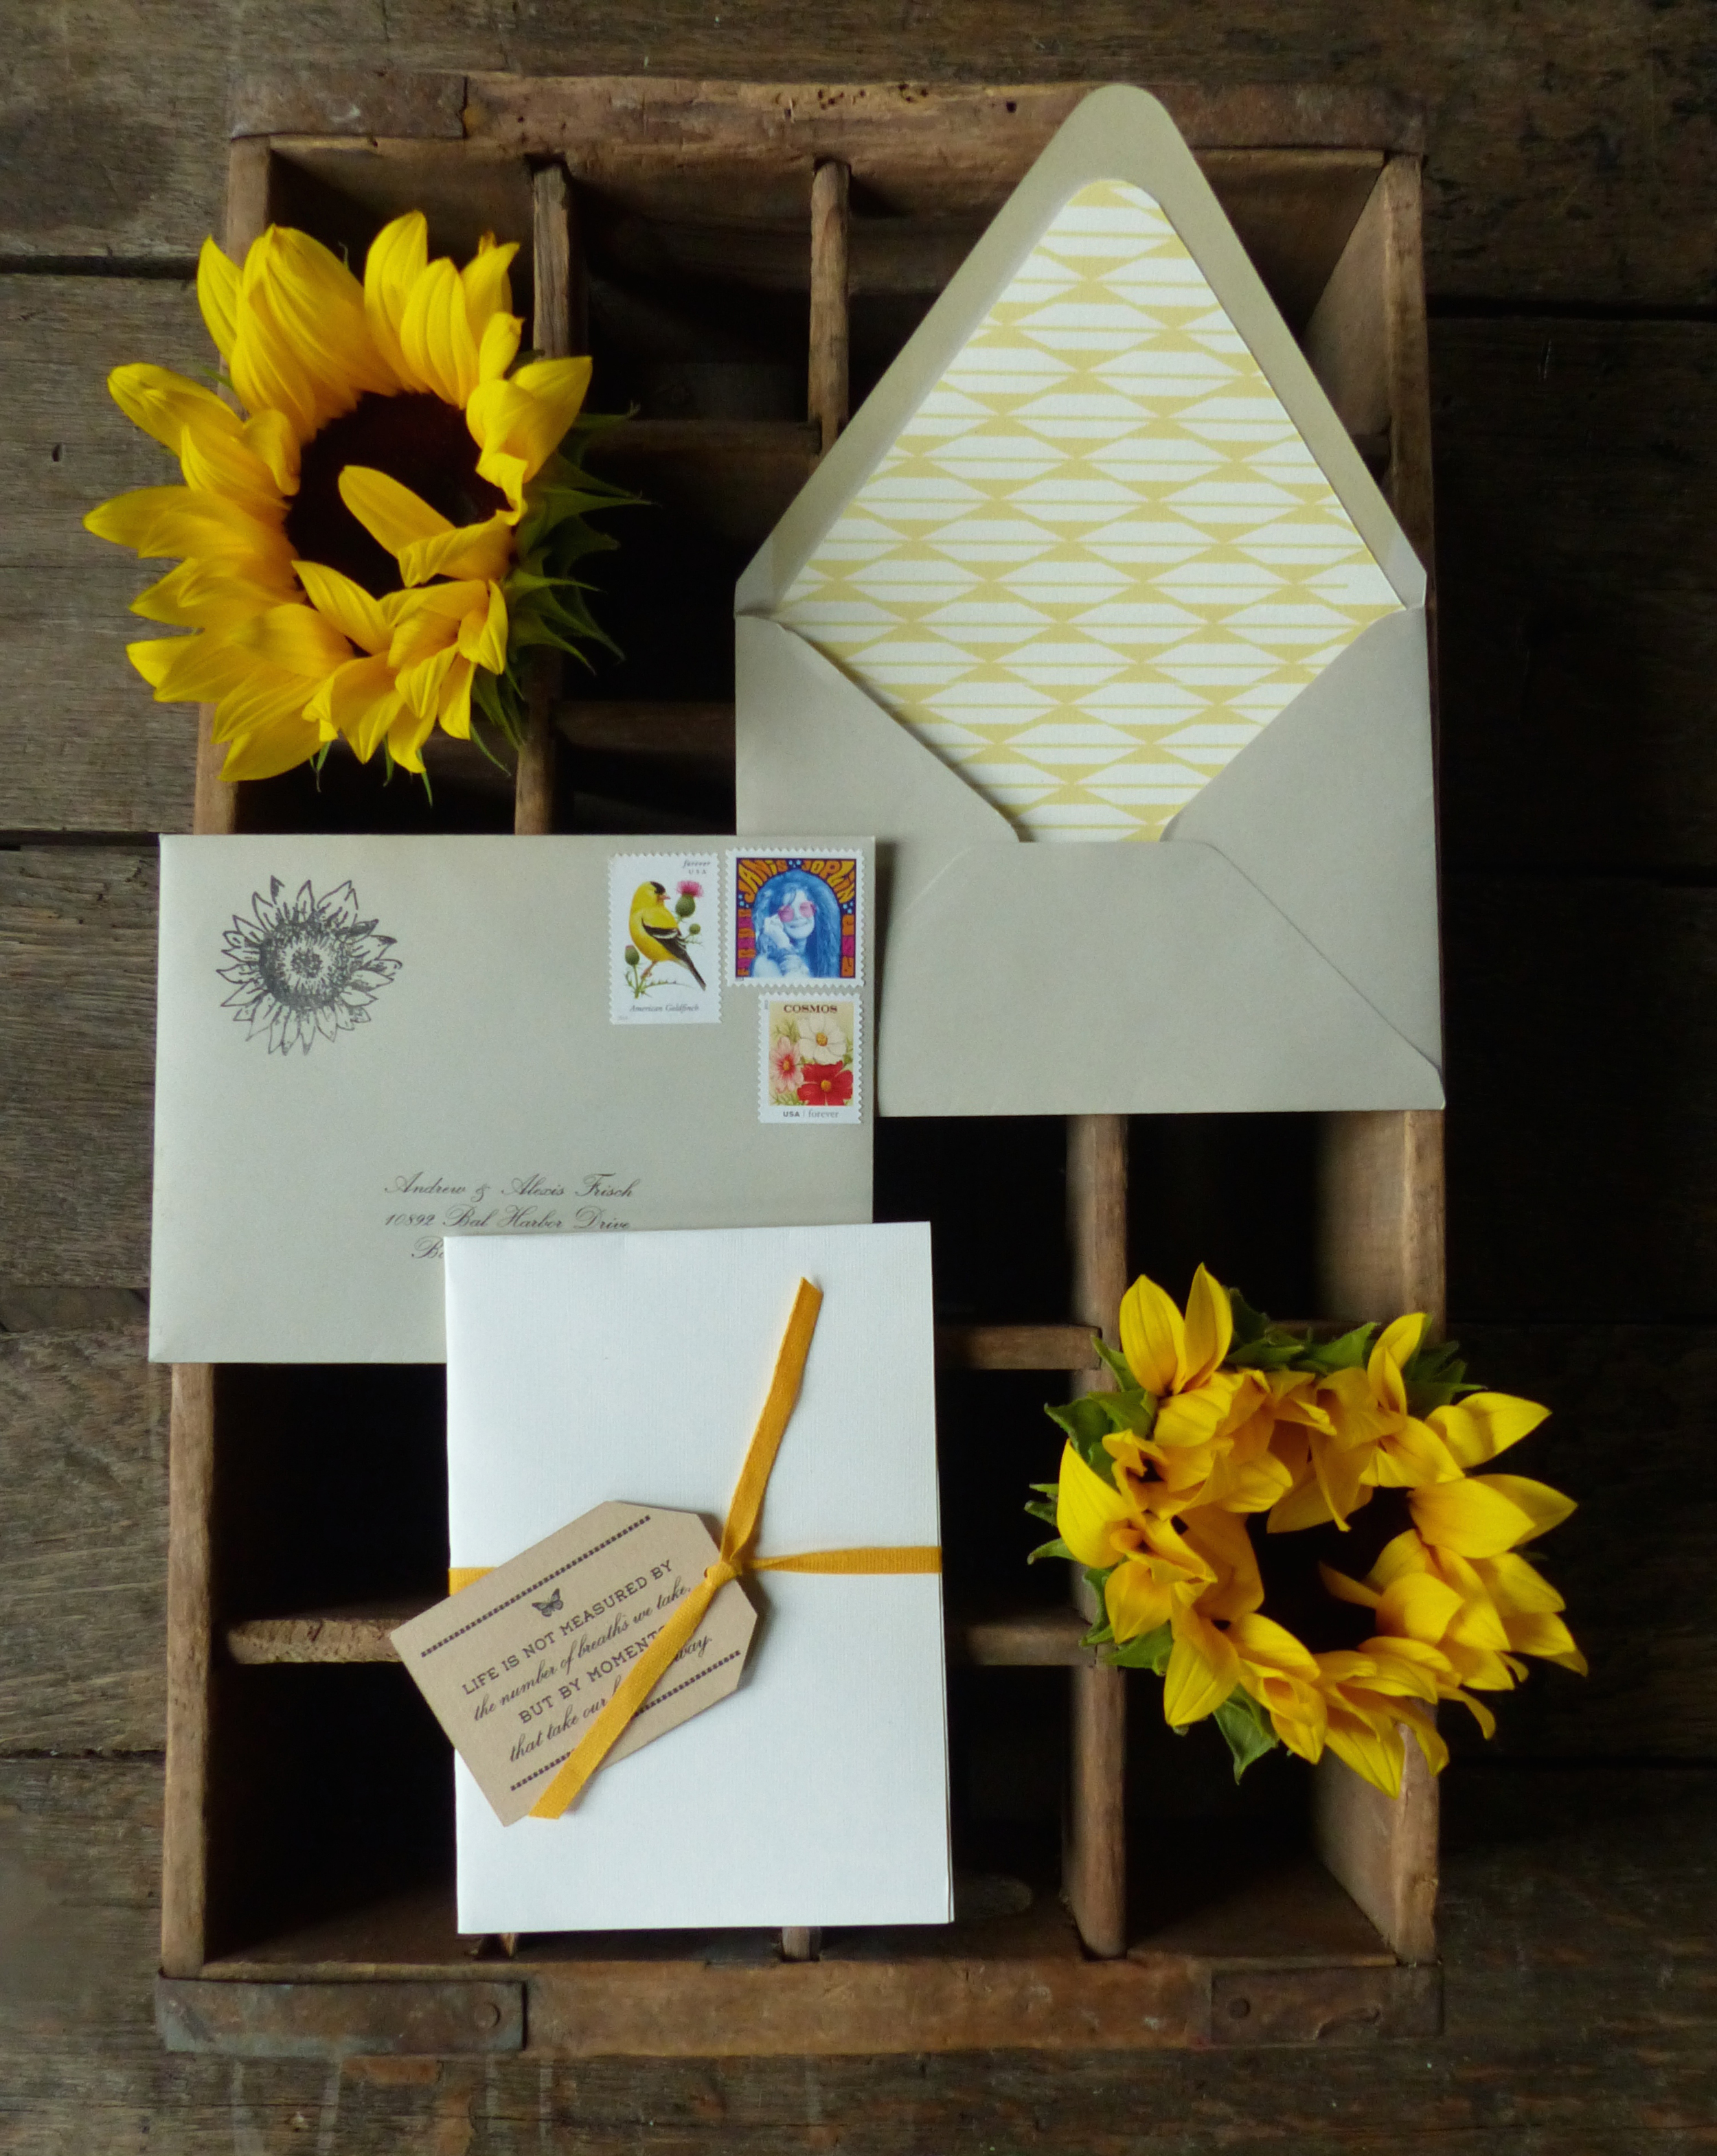  The invitation was delivered folded up inside of a regular old envelope, and bound with a sunny yellow cotton ribbon and tag.&nbsp; 